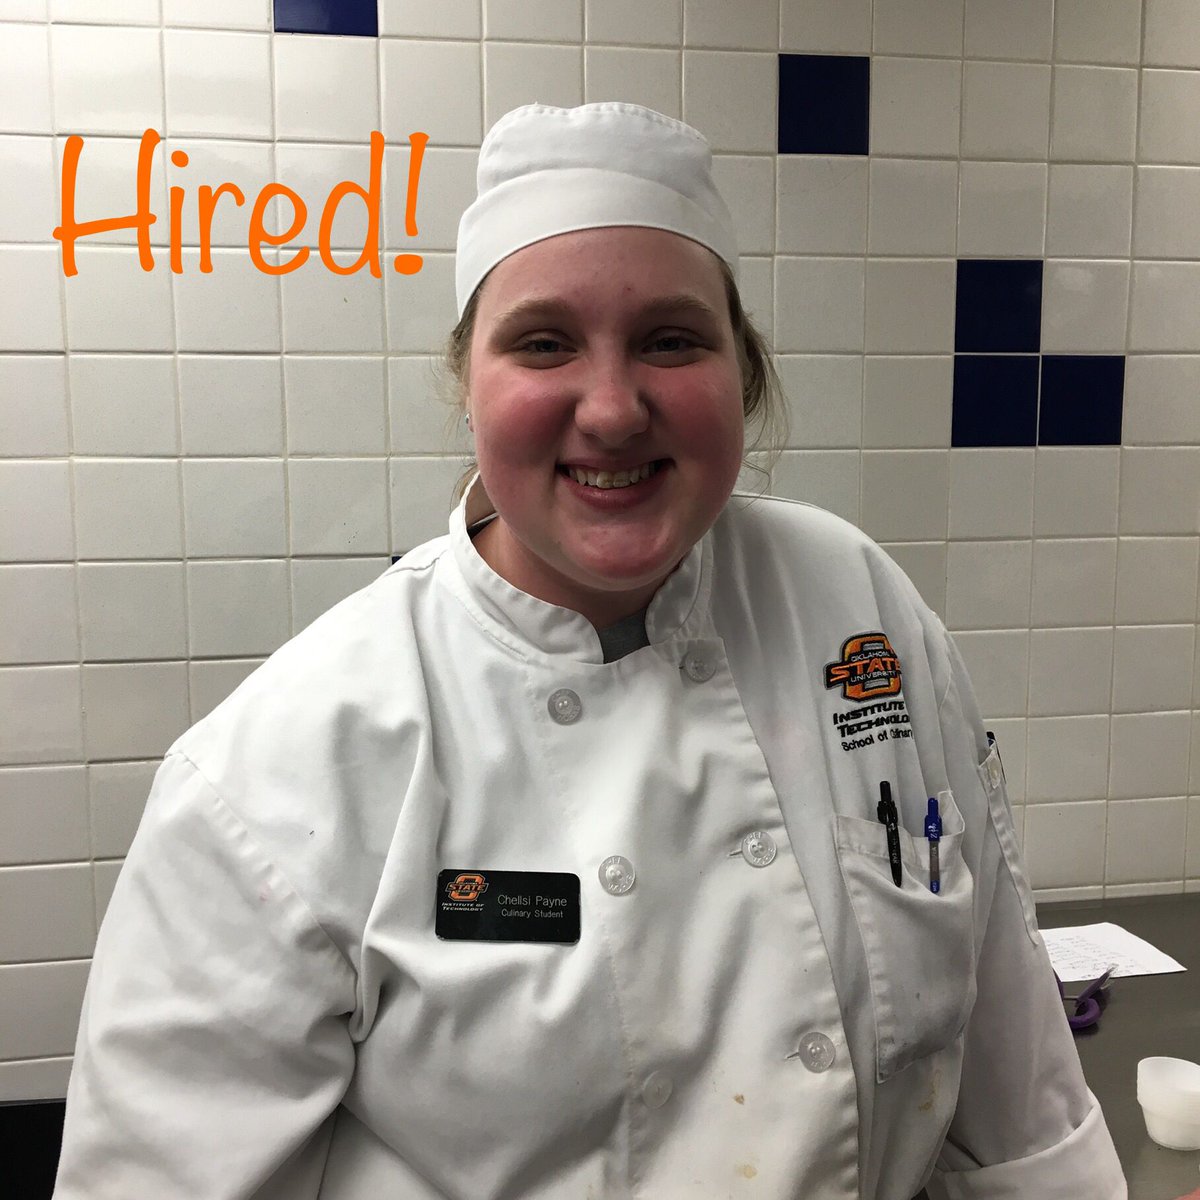 We prepare our students for jobs! As a result of the networking opportunity at the last #acftulsa meeting hosted @OSUITCulinary Chellsi made the connection and landed the job @GatheringPlace @acfchefs benefits our students with education and networking opportunities! #cowboychef